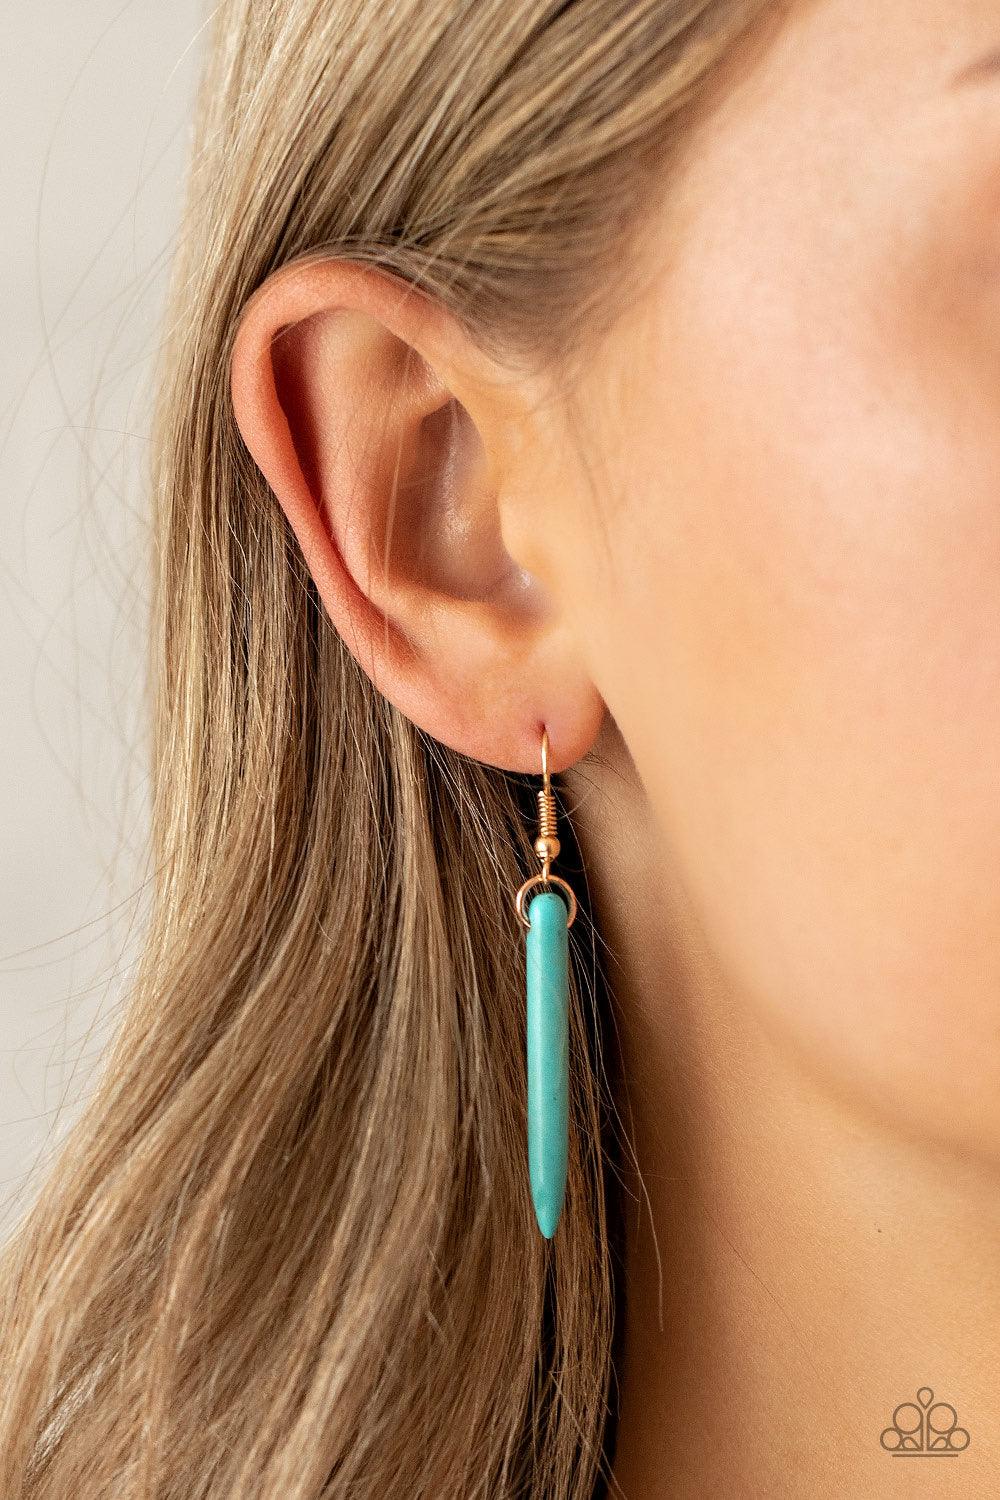 Paparazzi Accessories PRIMITIVE And Proper - Blue Capped in glistening gold fittings, refreshing turquoise stone tusk-like bars haphazardly dangle from two dainty gold chains, creating an earthy fringe at the bottom of a lengthened gold chain. Features an